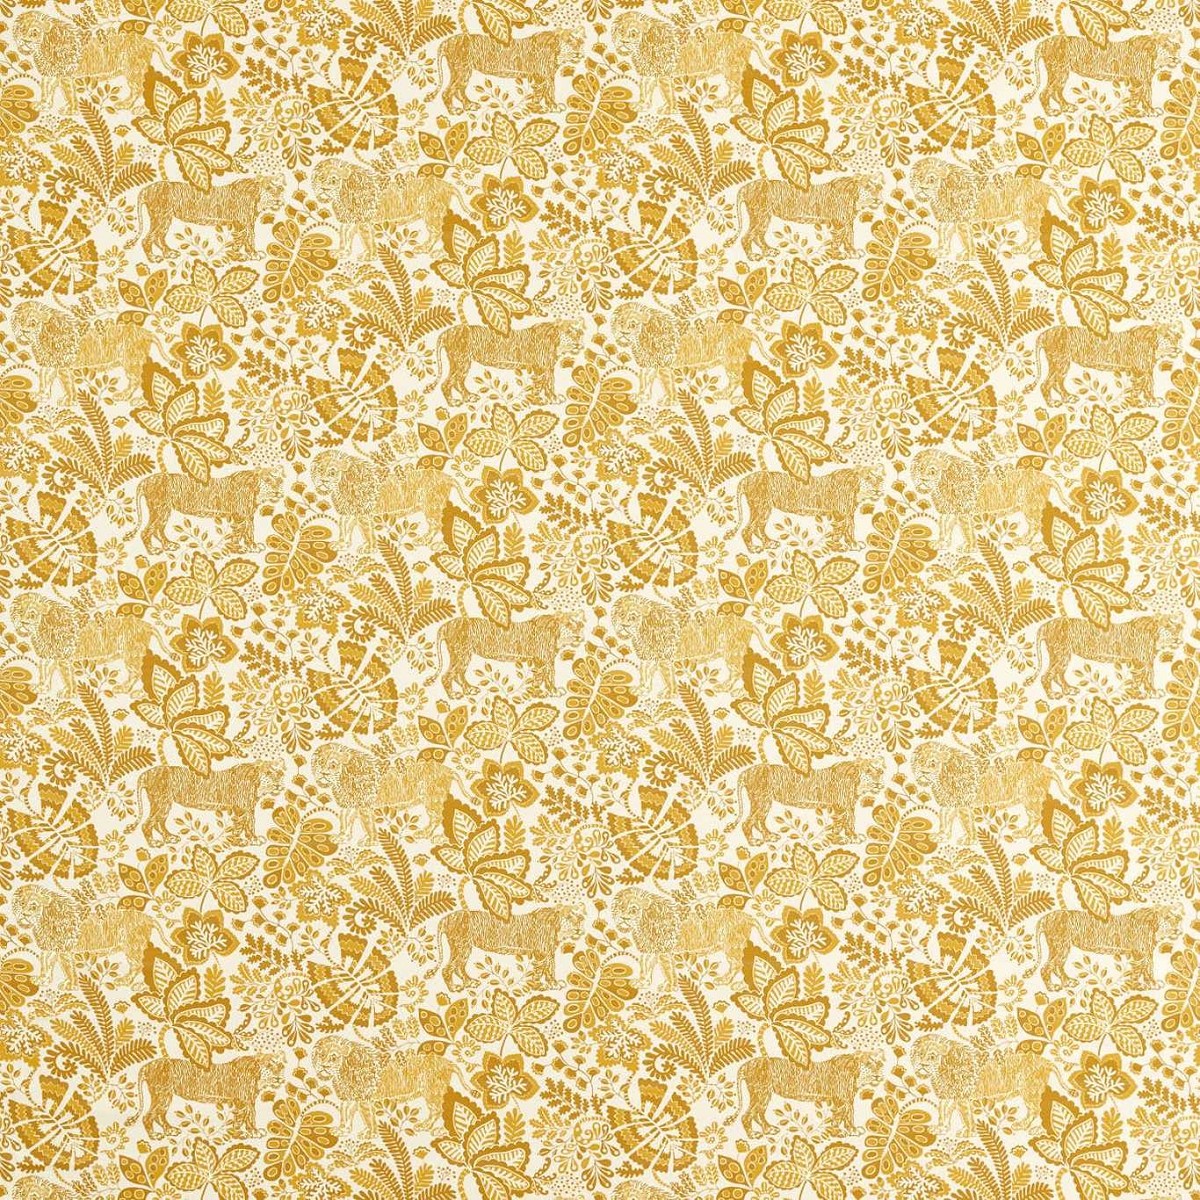 Rumble in the Jungle Pebble/Chai Fabric by Scion